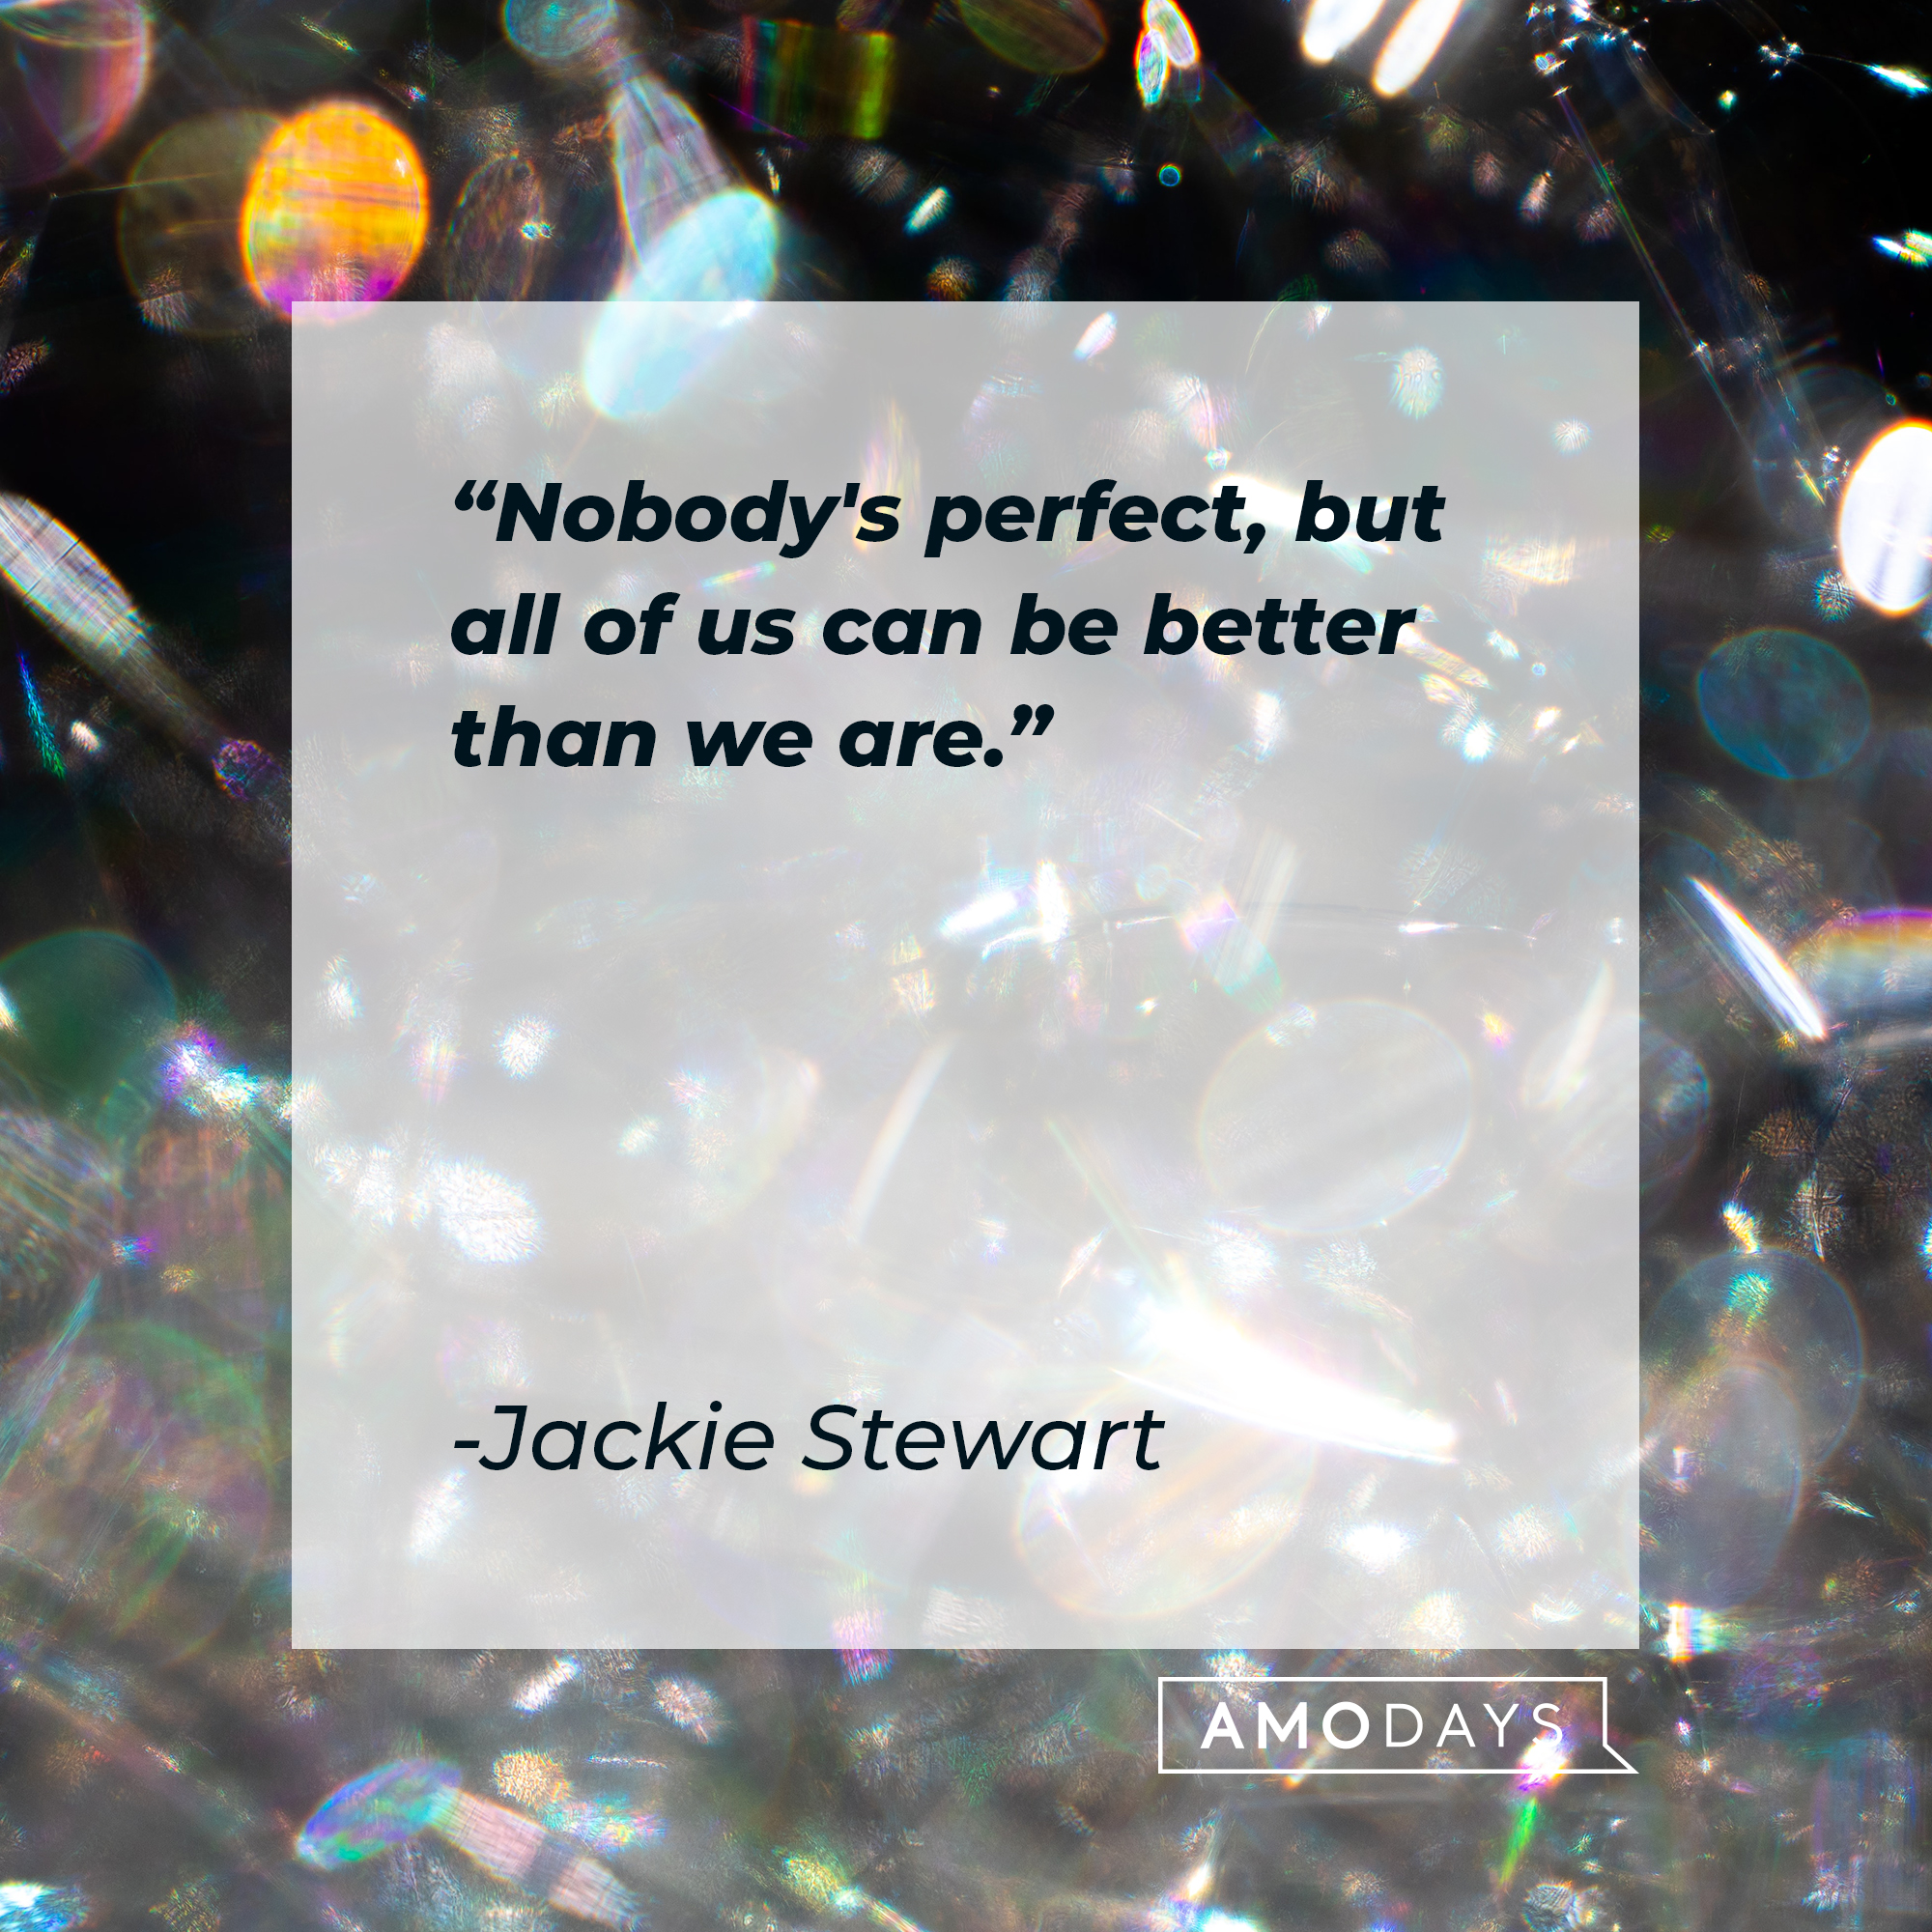 Jackie Stewart's quote: "Nobody's perfect, but all of us can be better than we are." | Image: Unsplash